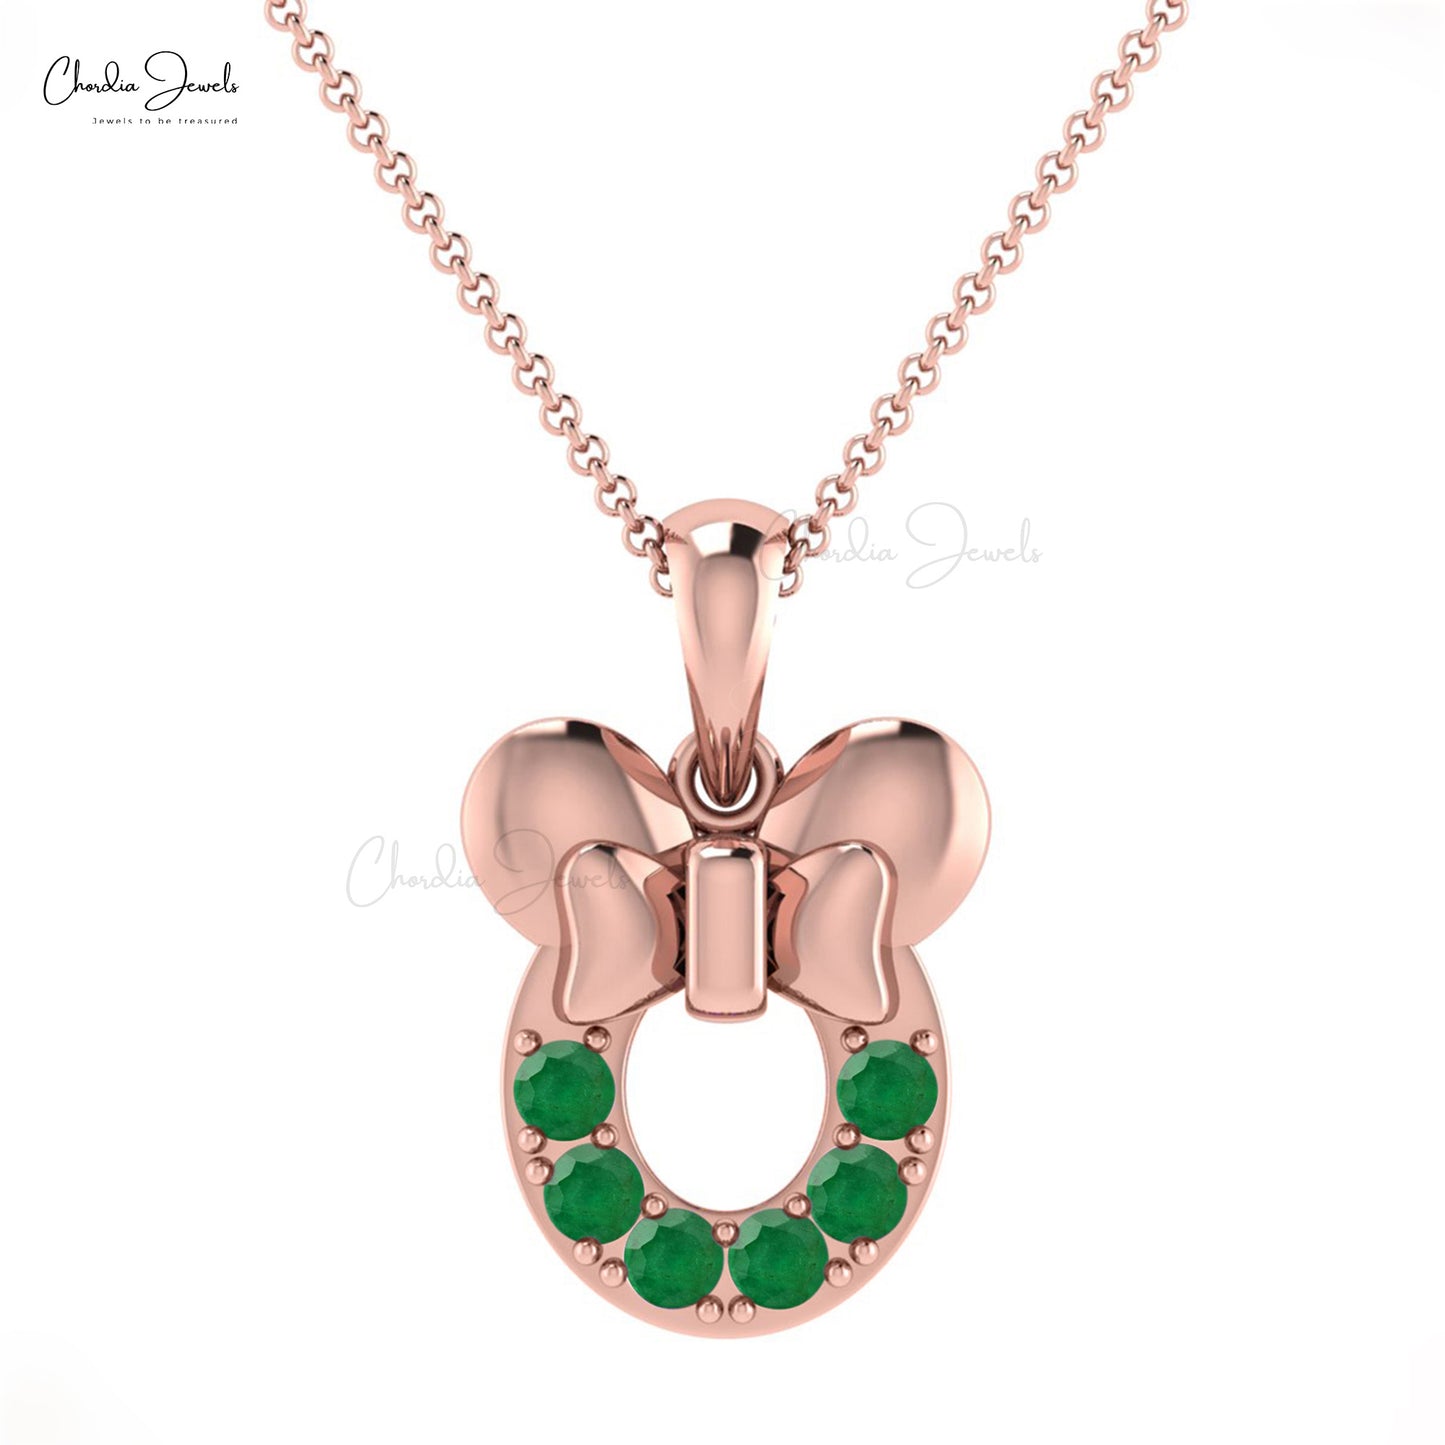 Mickey Mouse Kids Pendant In 14k Solid Gold Authentic Emerald Gemstone Pave Setting Pendant